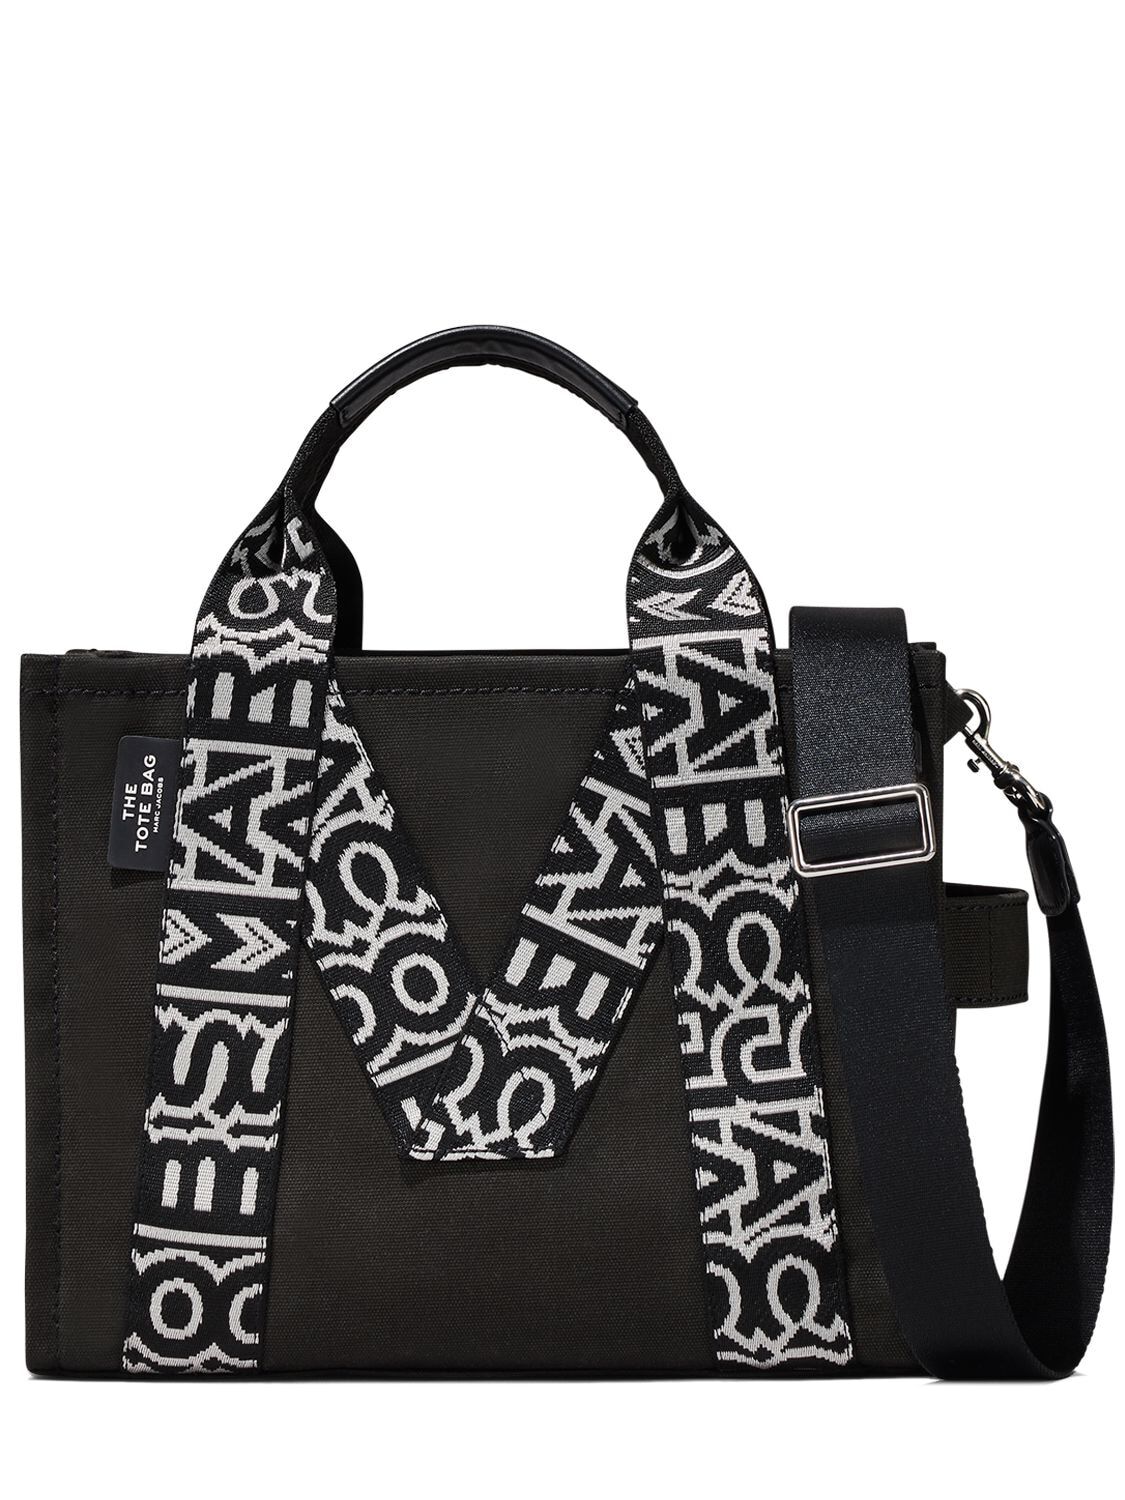 MARC JACOBS The Medium Tote Canvas Bag in black / white